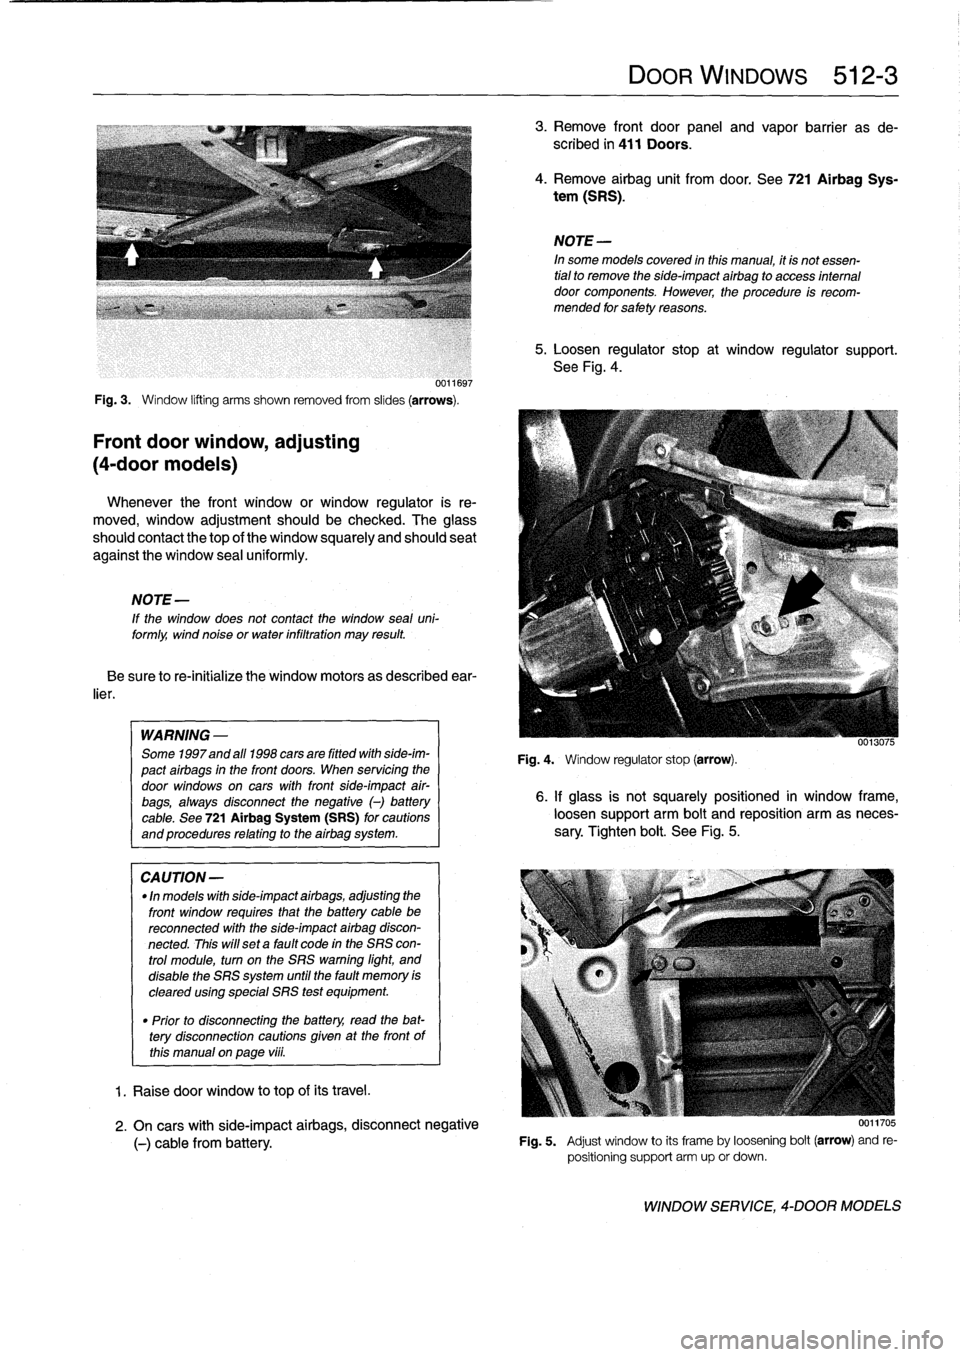 BMW 328i 1994 E36 Workshop Manual 
0011697

Fig
.
3
.

	

Window
lifting
arms
shown
removed
from
slides
(arrows)
.

Front
door
window,
adjusting

(4-door
models)

Whenever
the
front
window
or
window
regulator
is
re-

moved,
window
adj